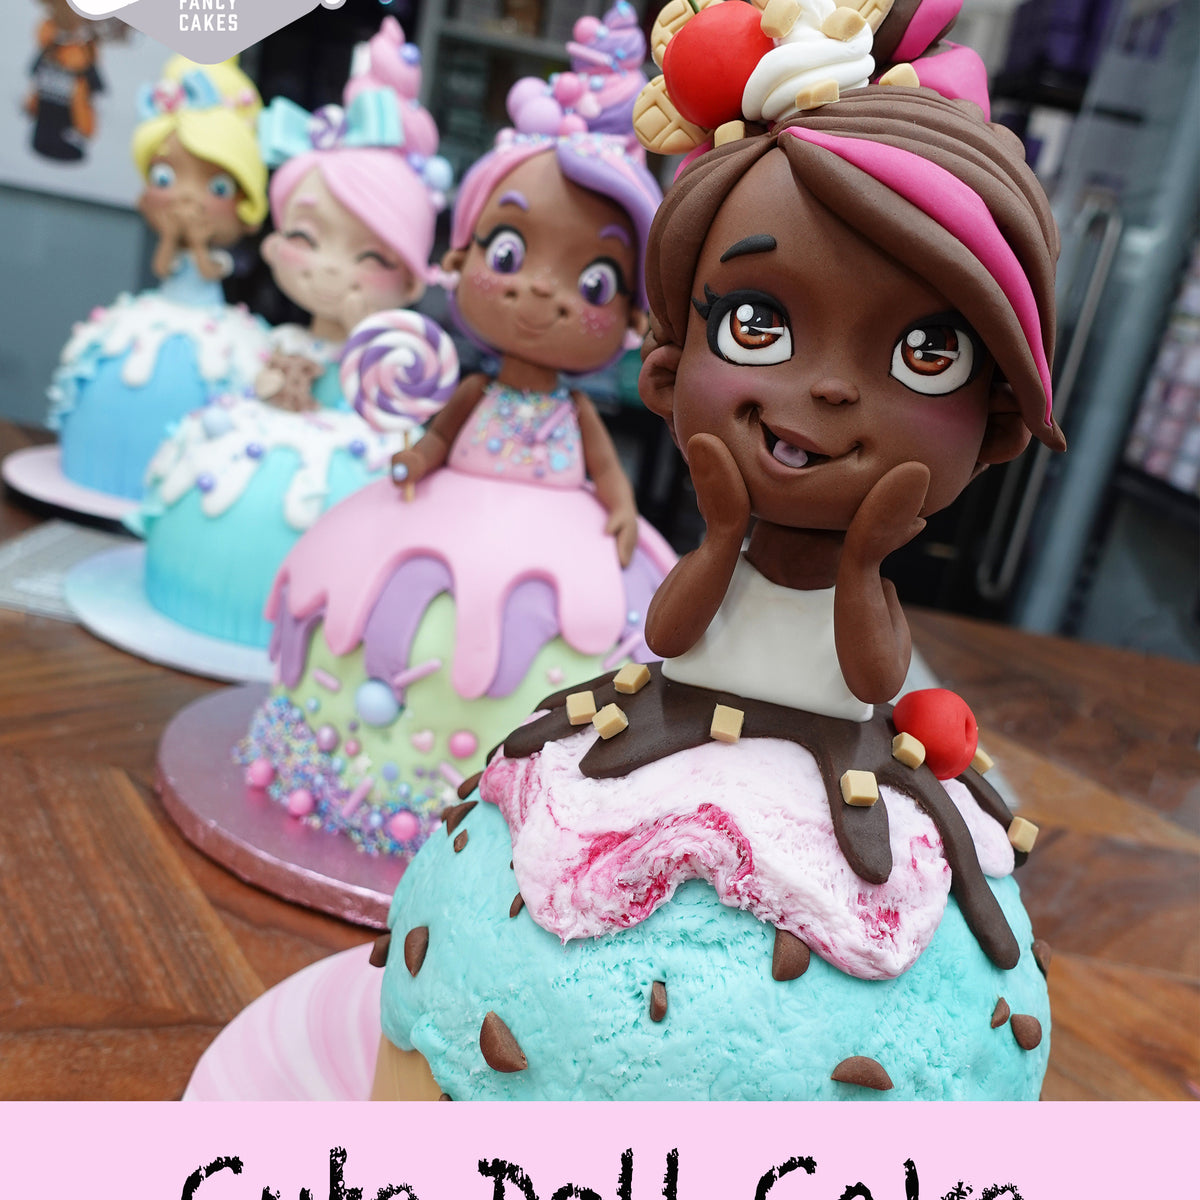 2,648 Doll Birthday Cake Images, Stock Photos & Vectors | Shutterstock